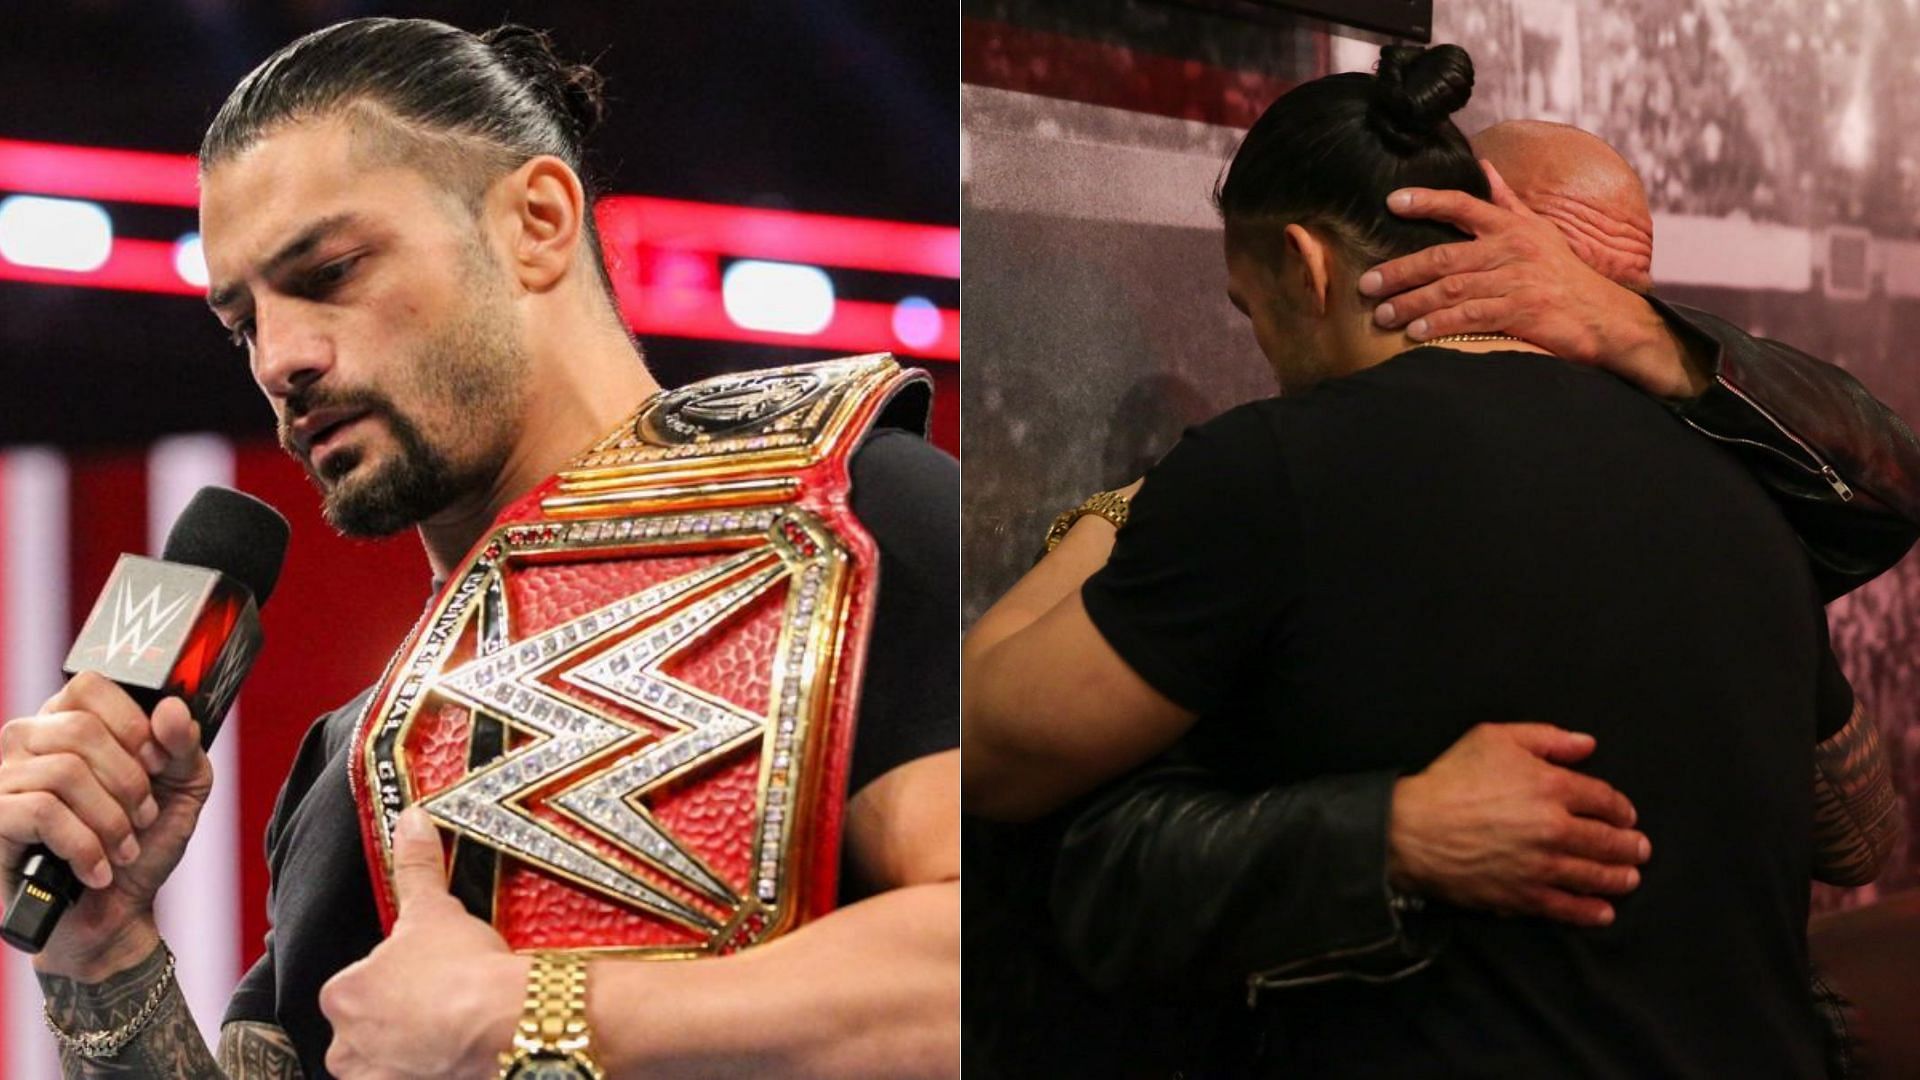 Roman Reigns announced his leukemia diagnosis on the October 22, 2018, episode of RAW.